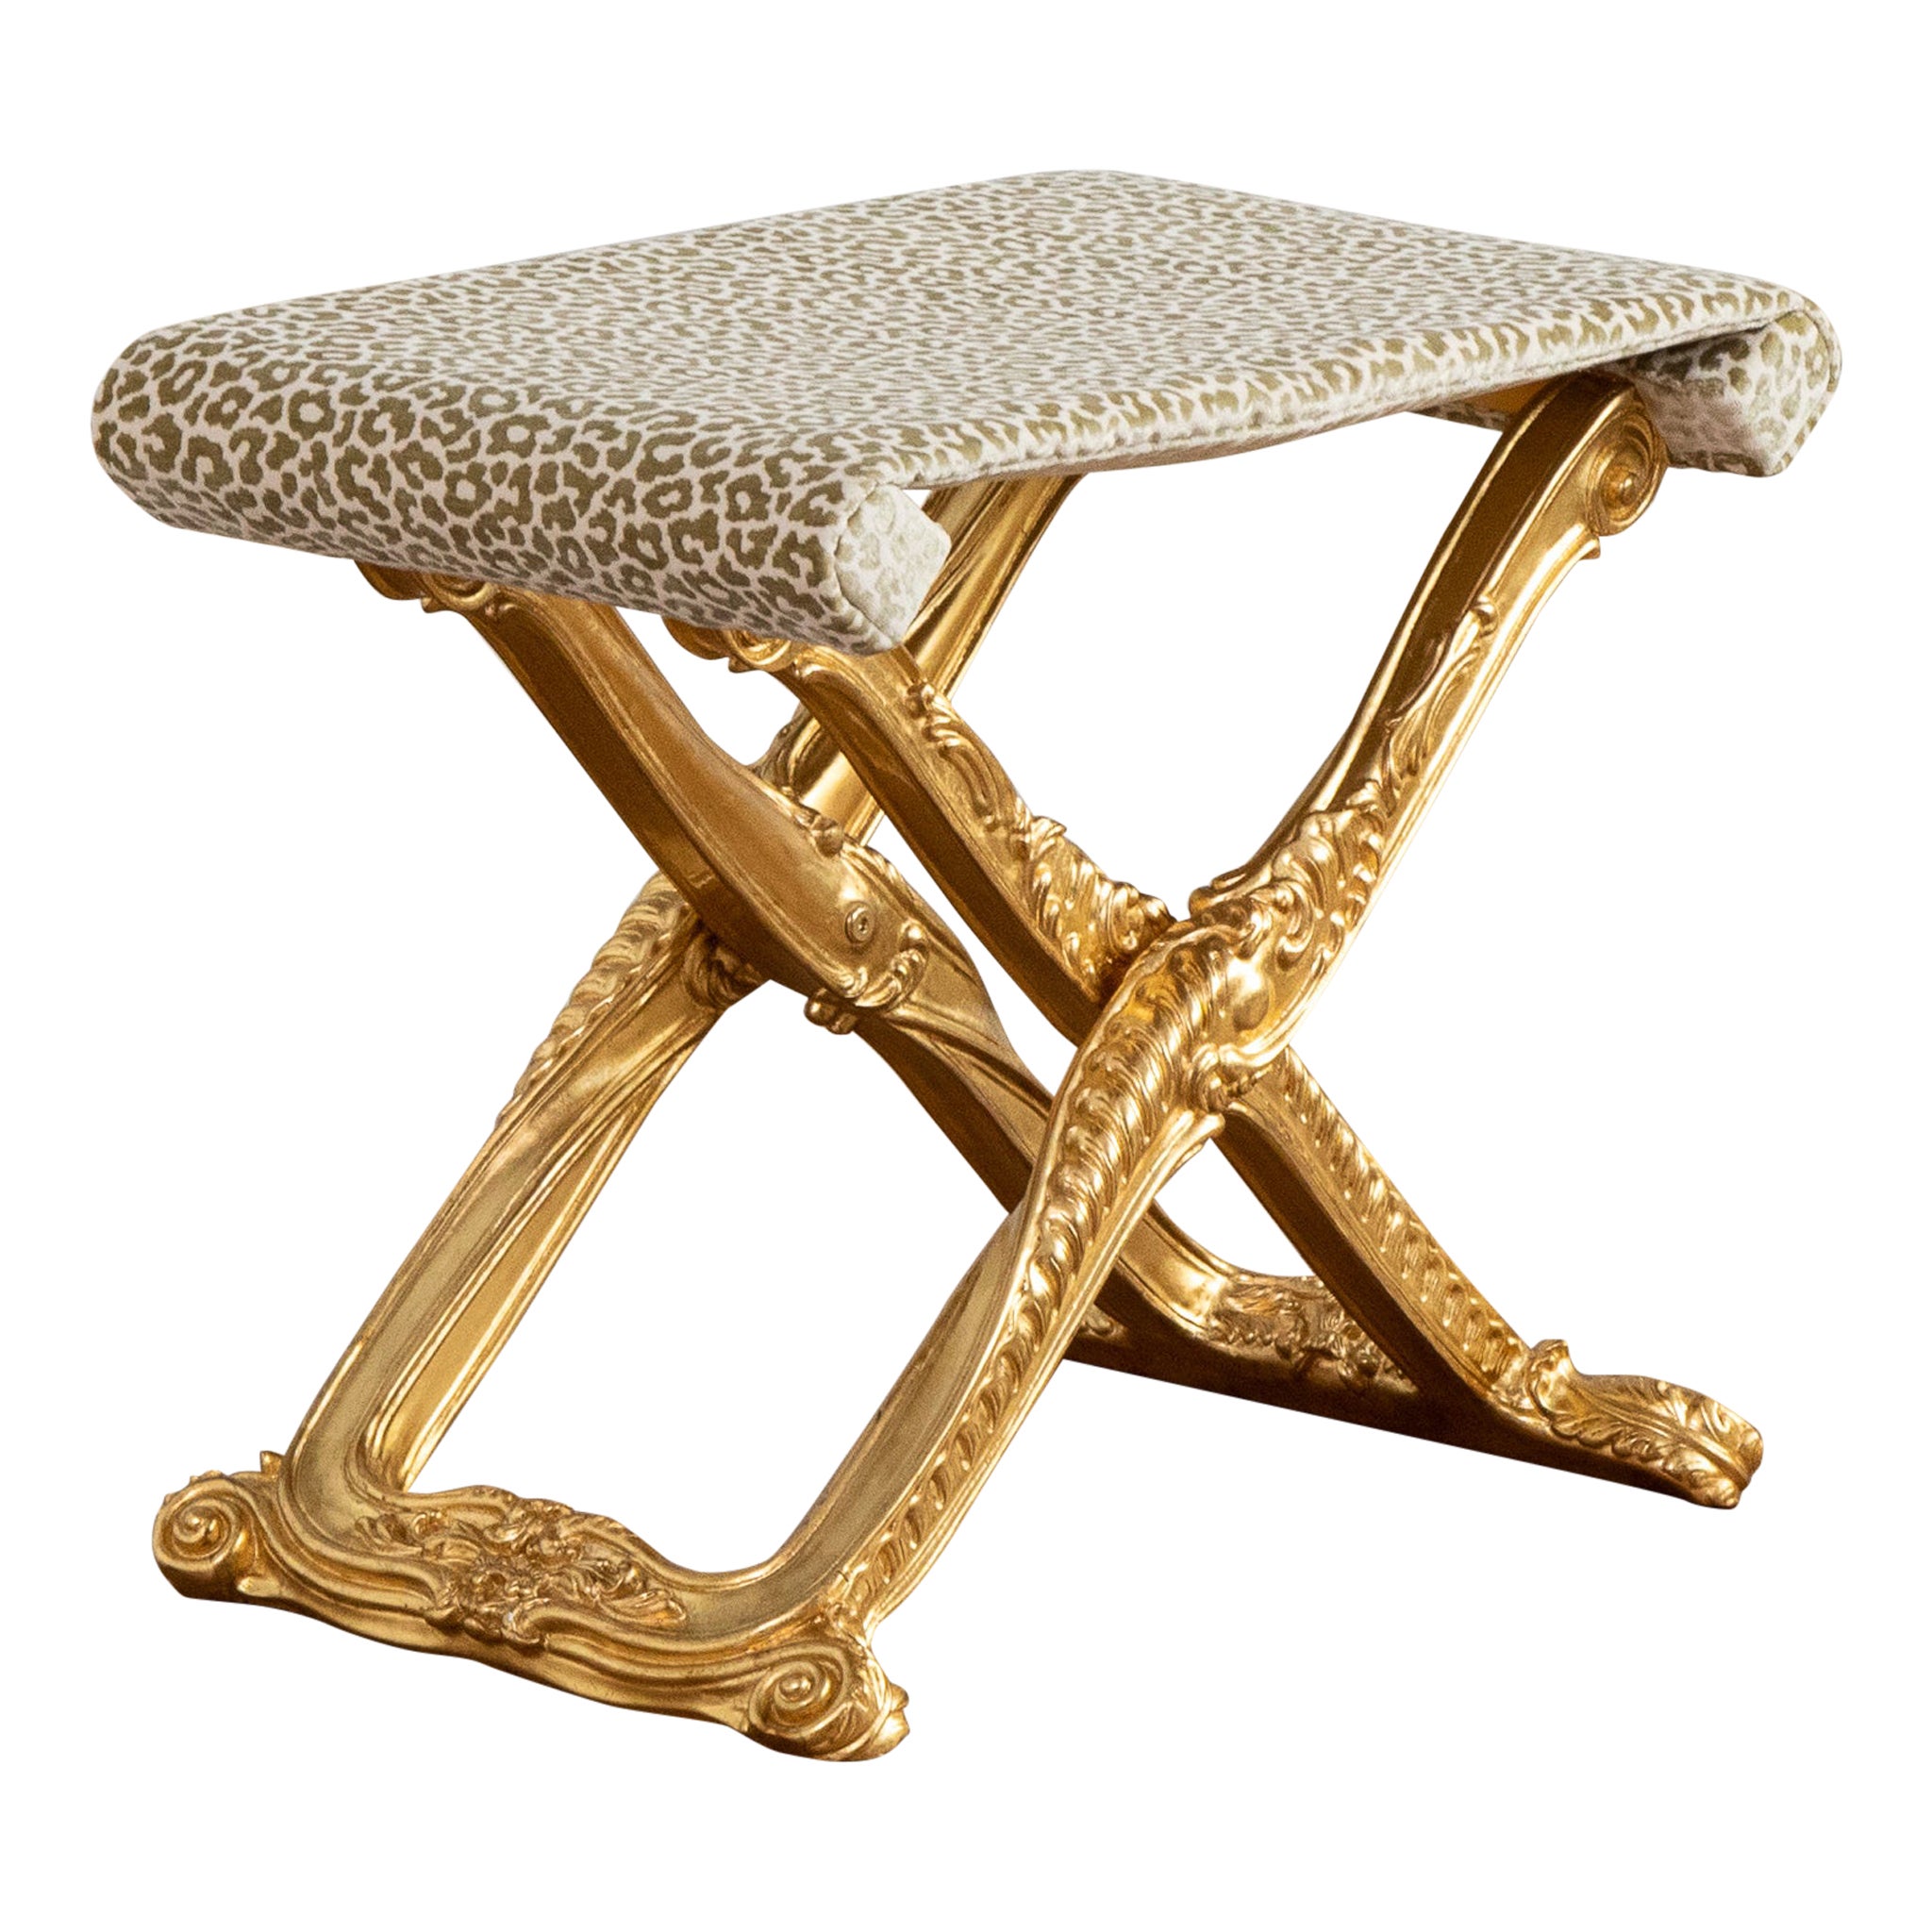  Louis XIV Style Giltwood folding stool made by La Maison London For Sale